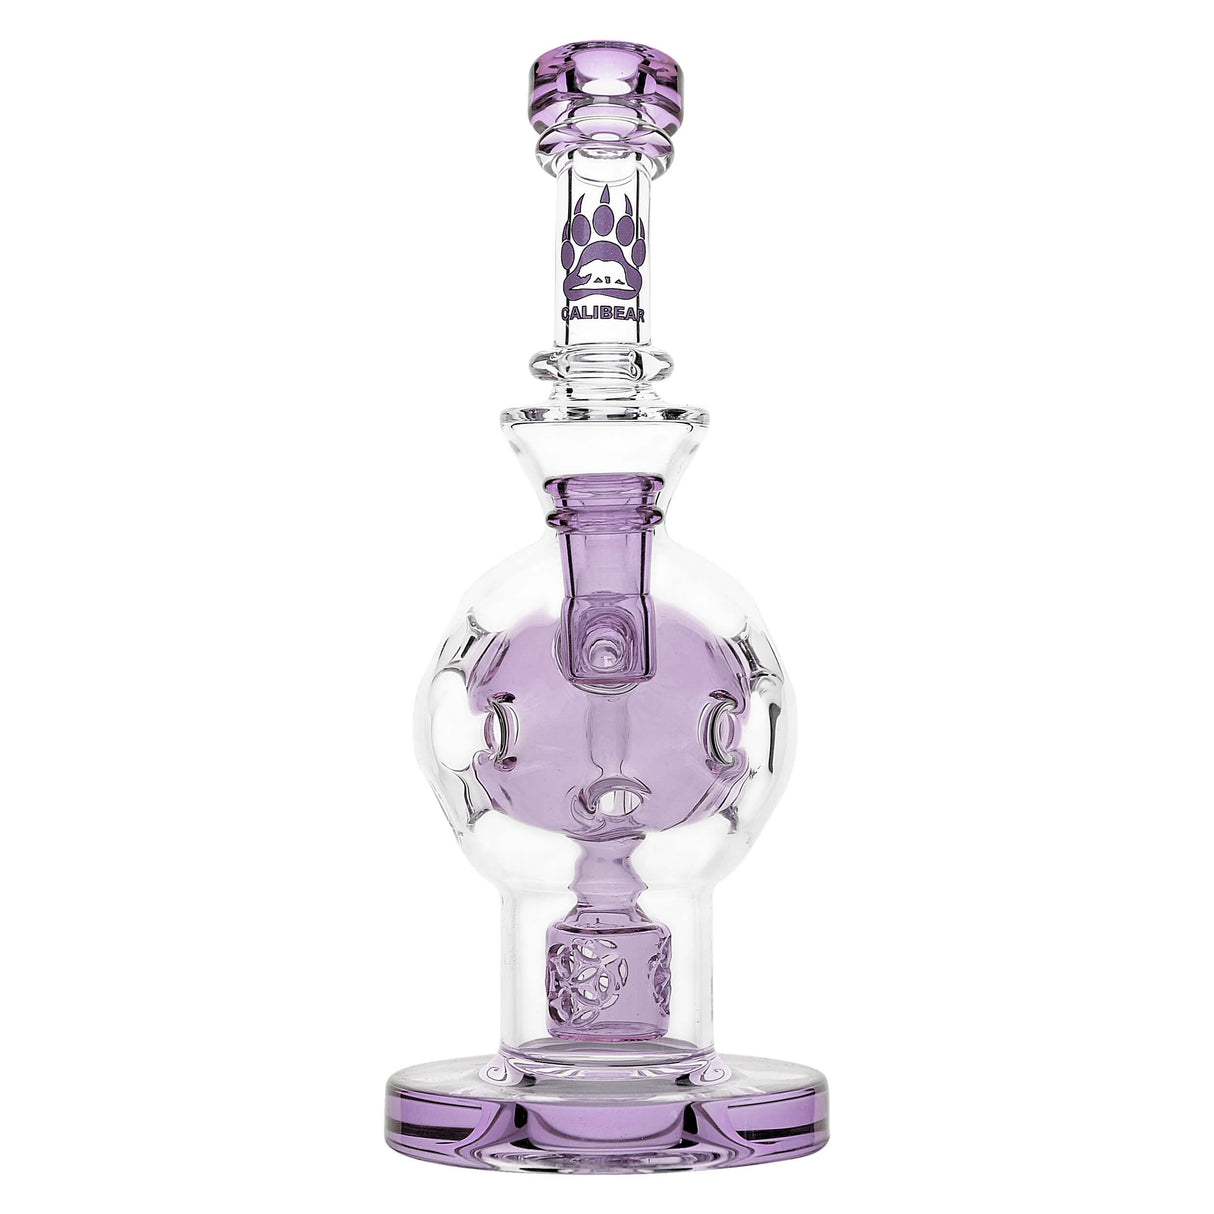 Calibear EXOSPHERE Dab Rig in Purple with Seed of Life Perc, Beaker Design, and 14mm Joint